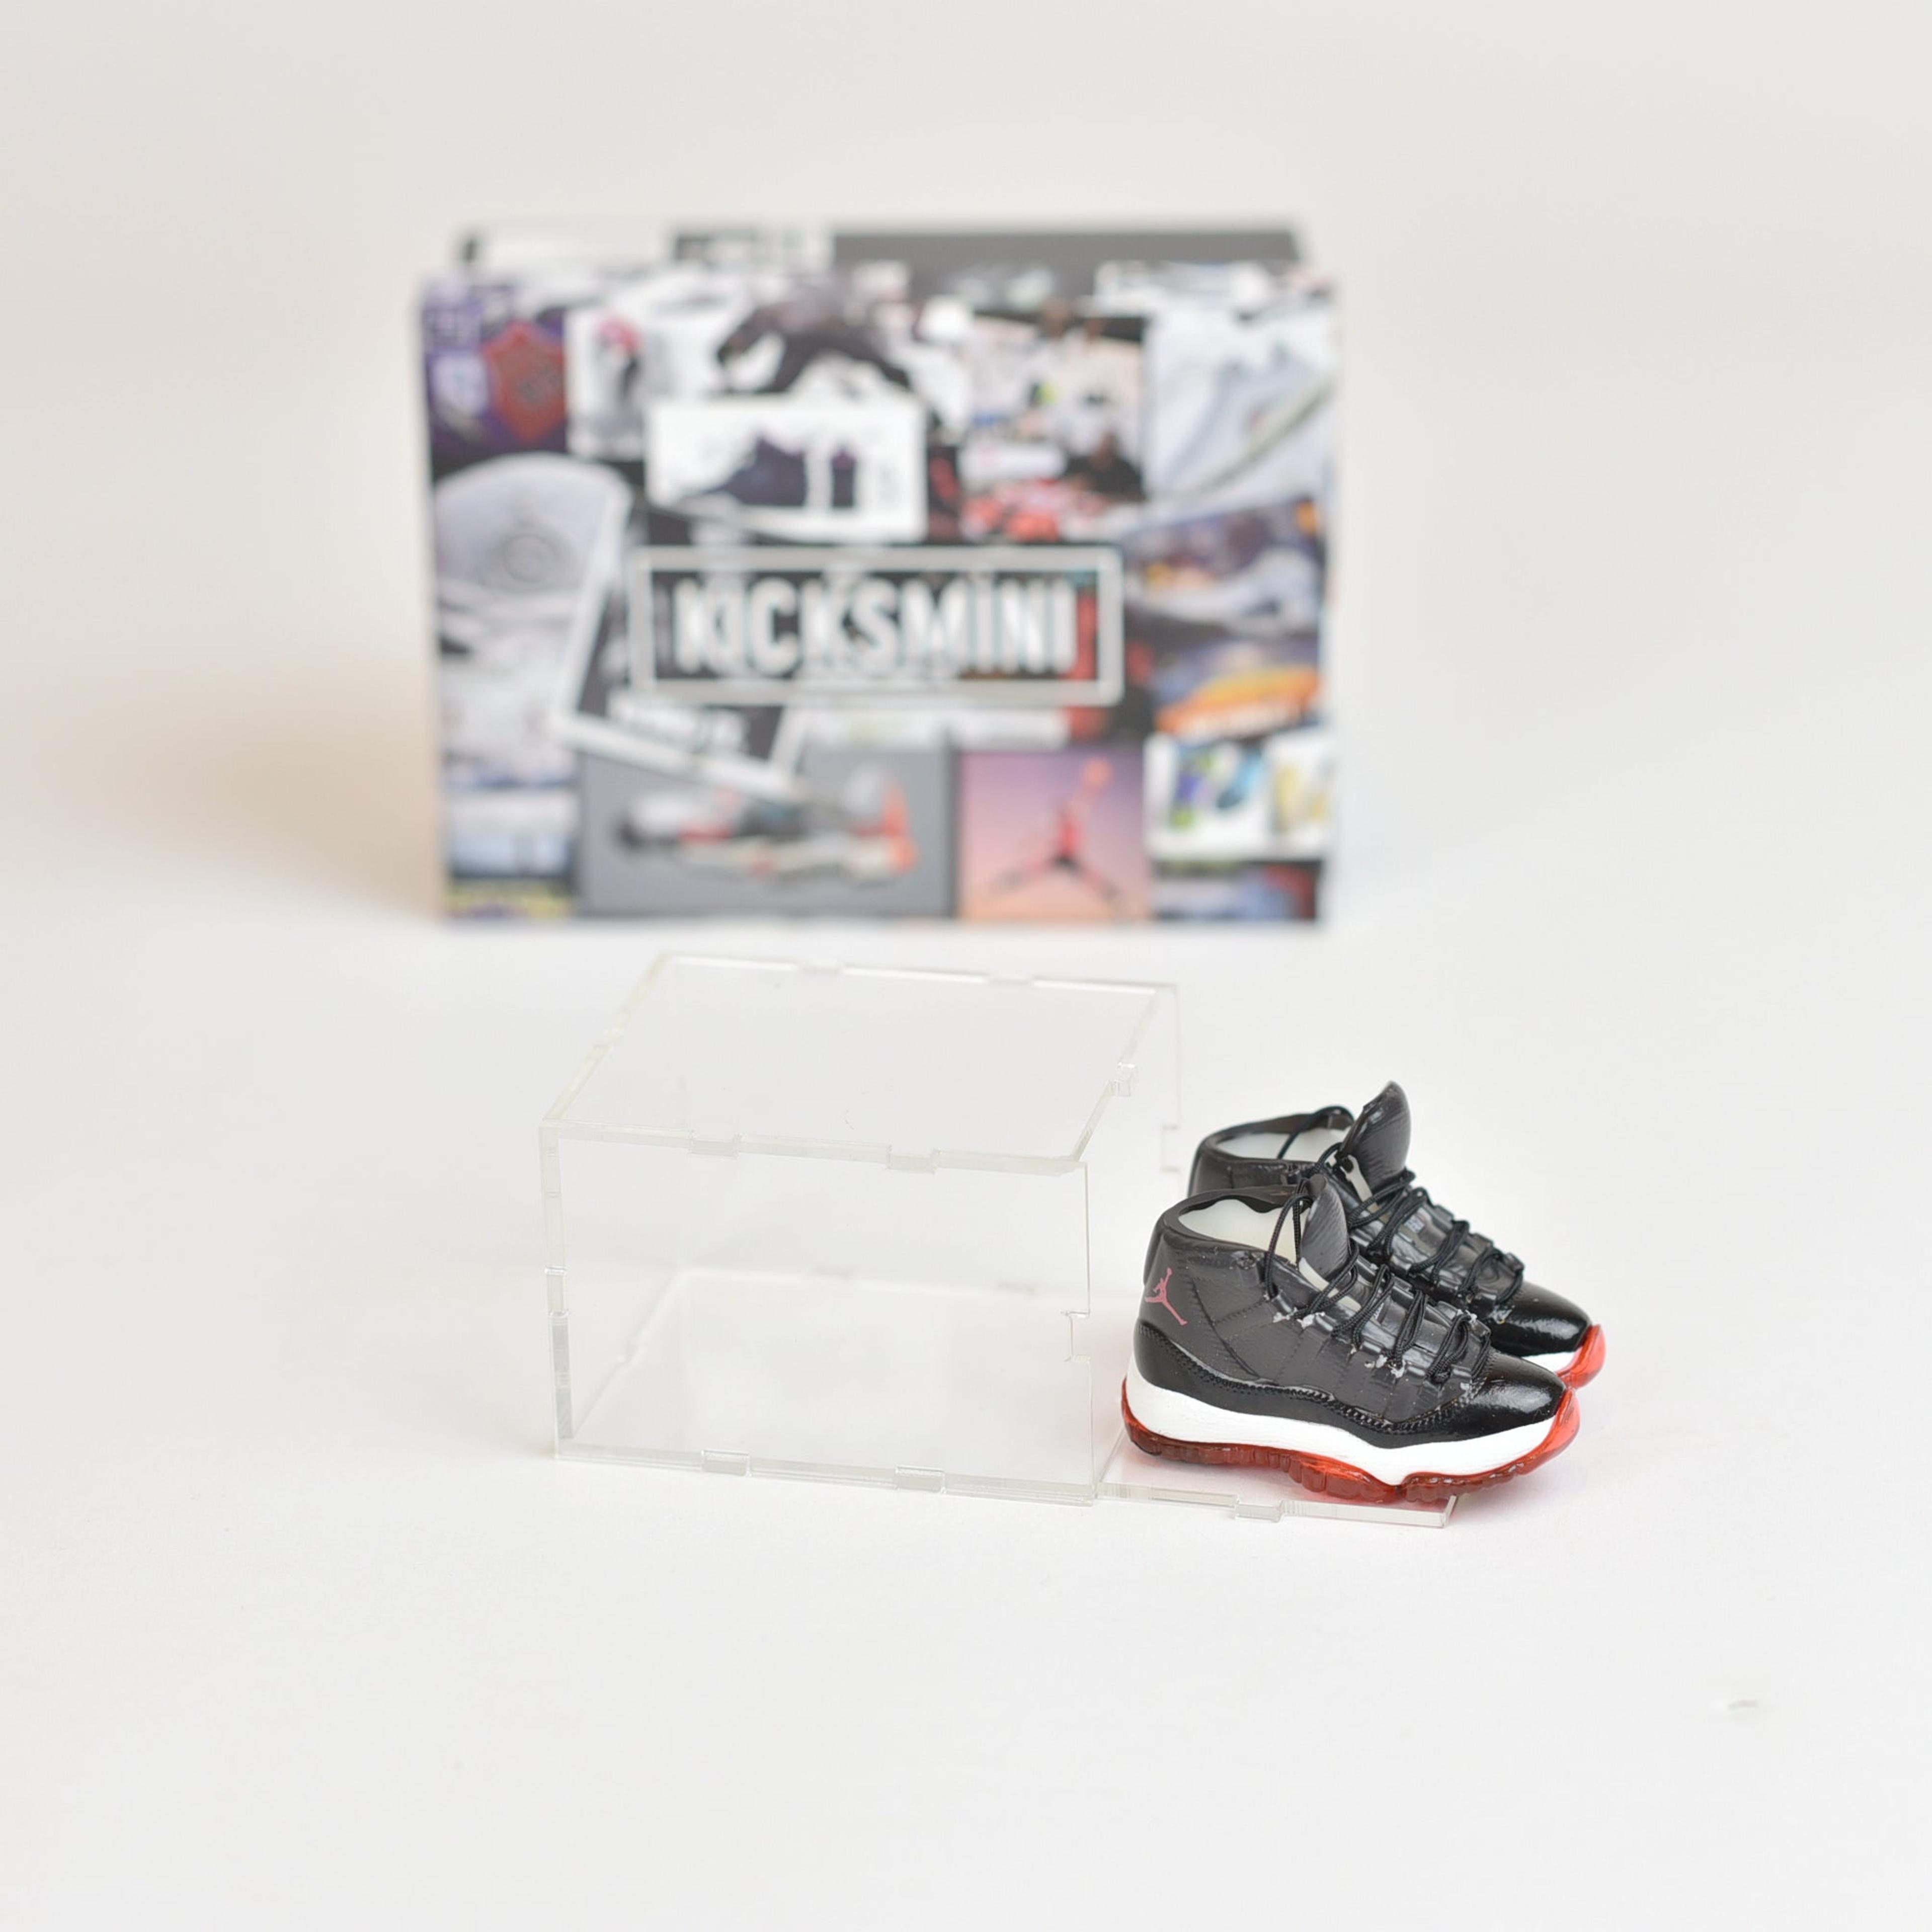 Alternate View 26 of AJ2-AJ13 Mini Sneakers Collection with Display Case